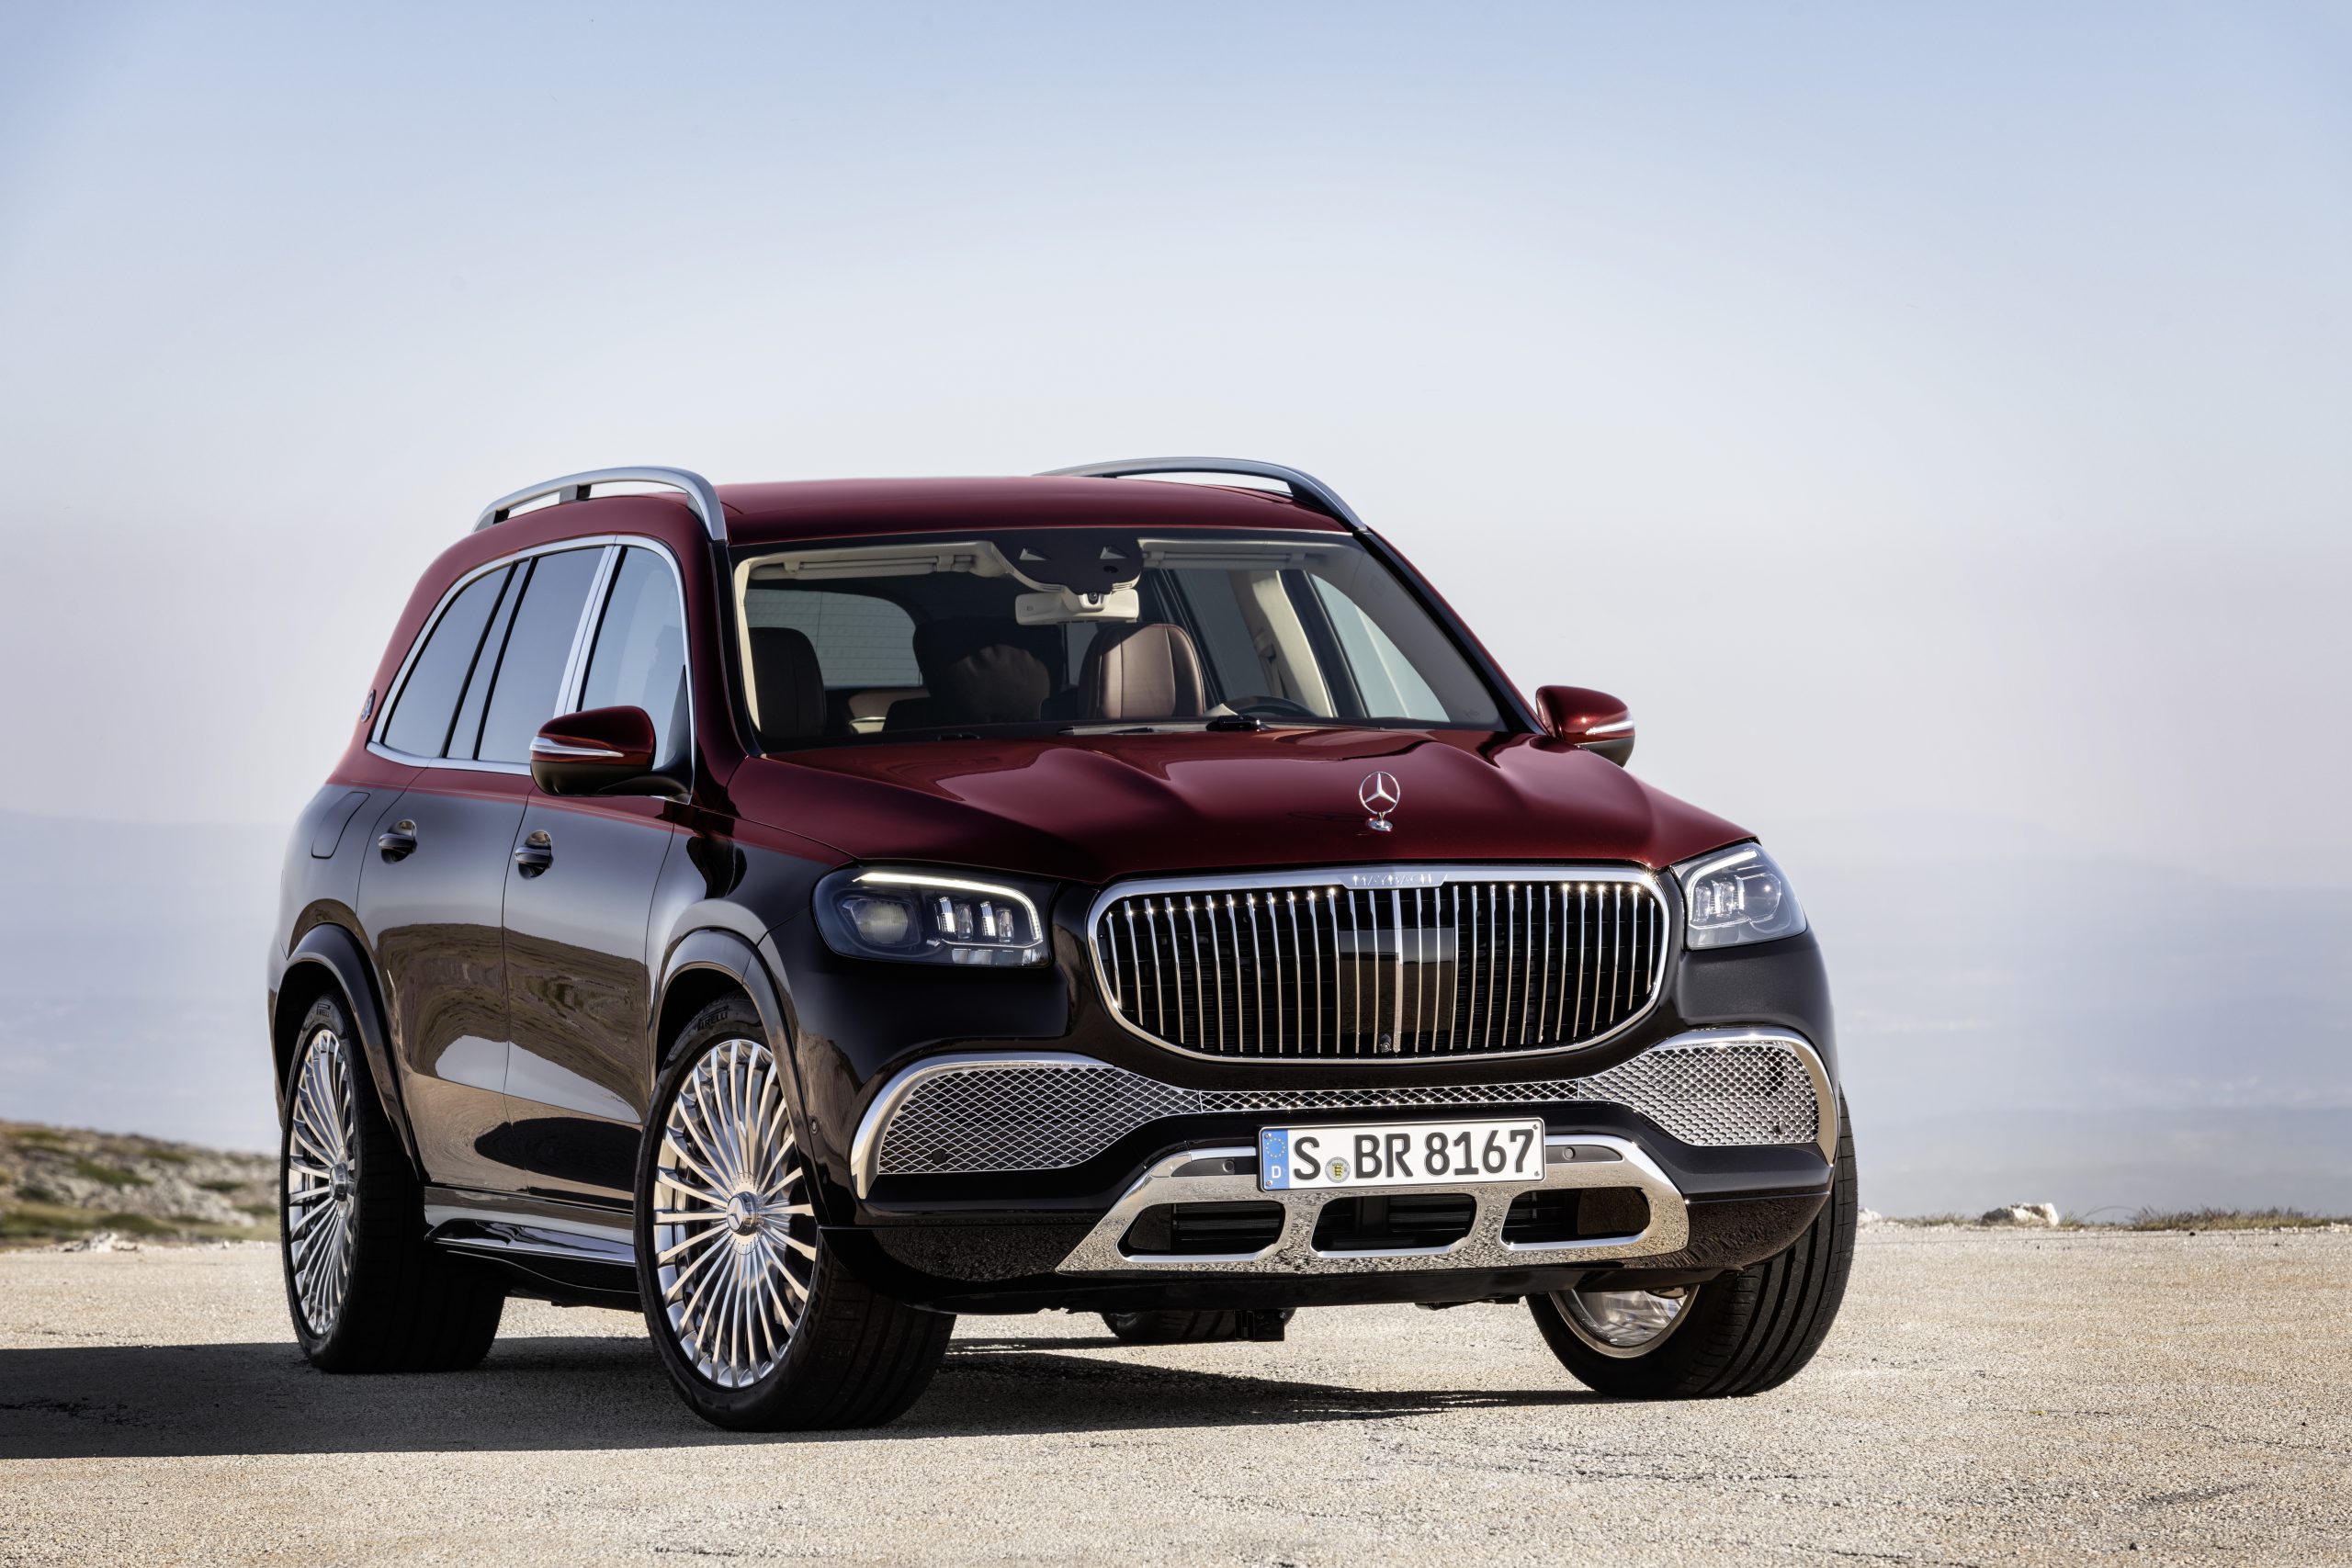 Mercedes-Maybach GLS 600 4MATIC Revealed